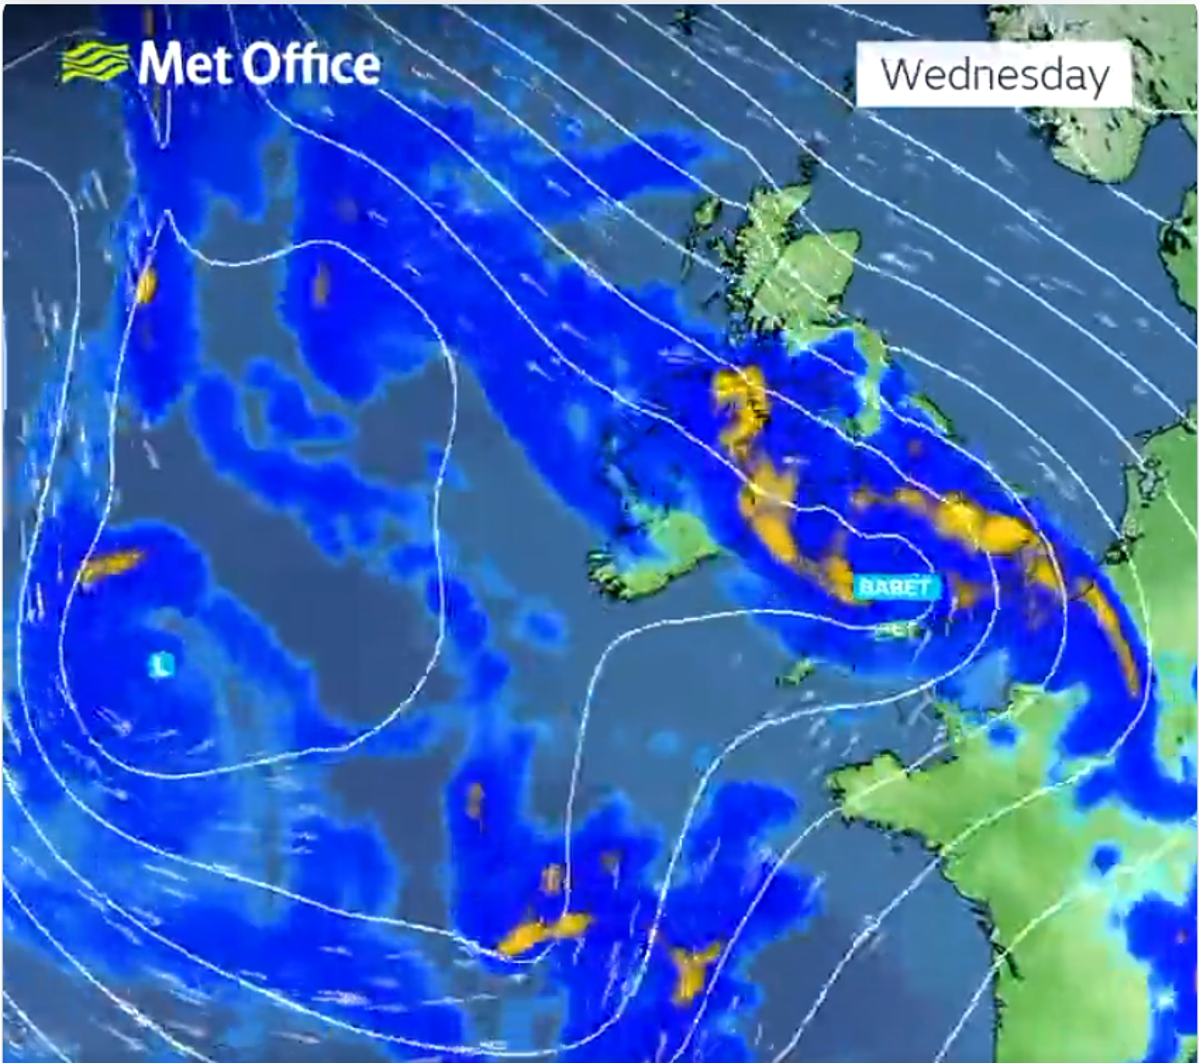 Babet will arrive in the South West and move upwards bringing blustery winds and heavy rain across the UK (The Met Office)